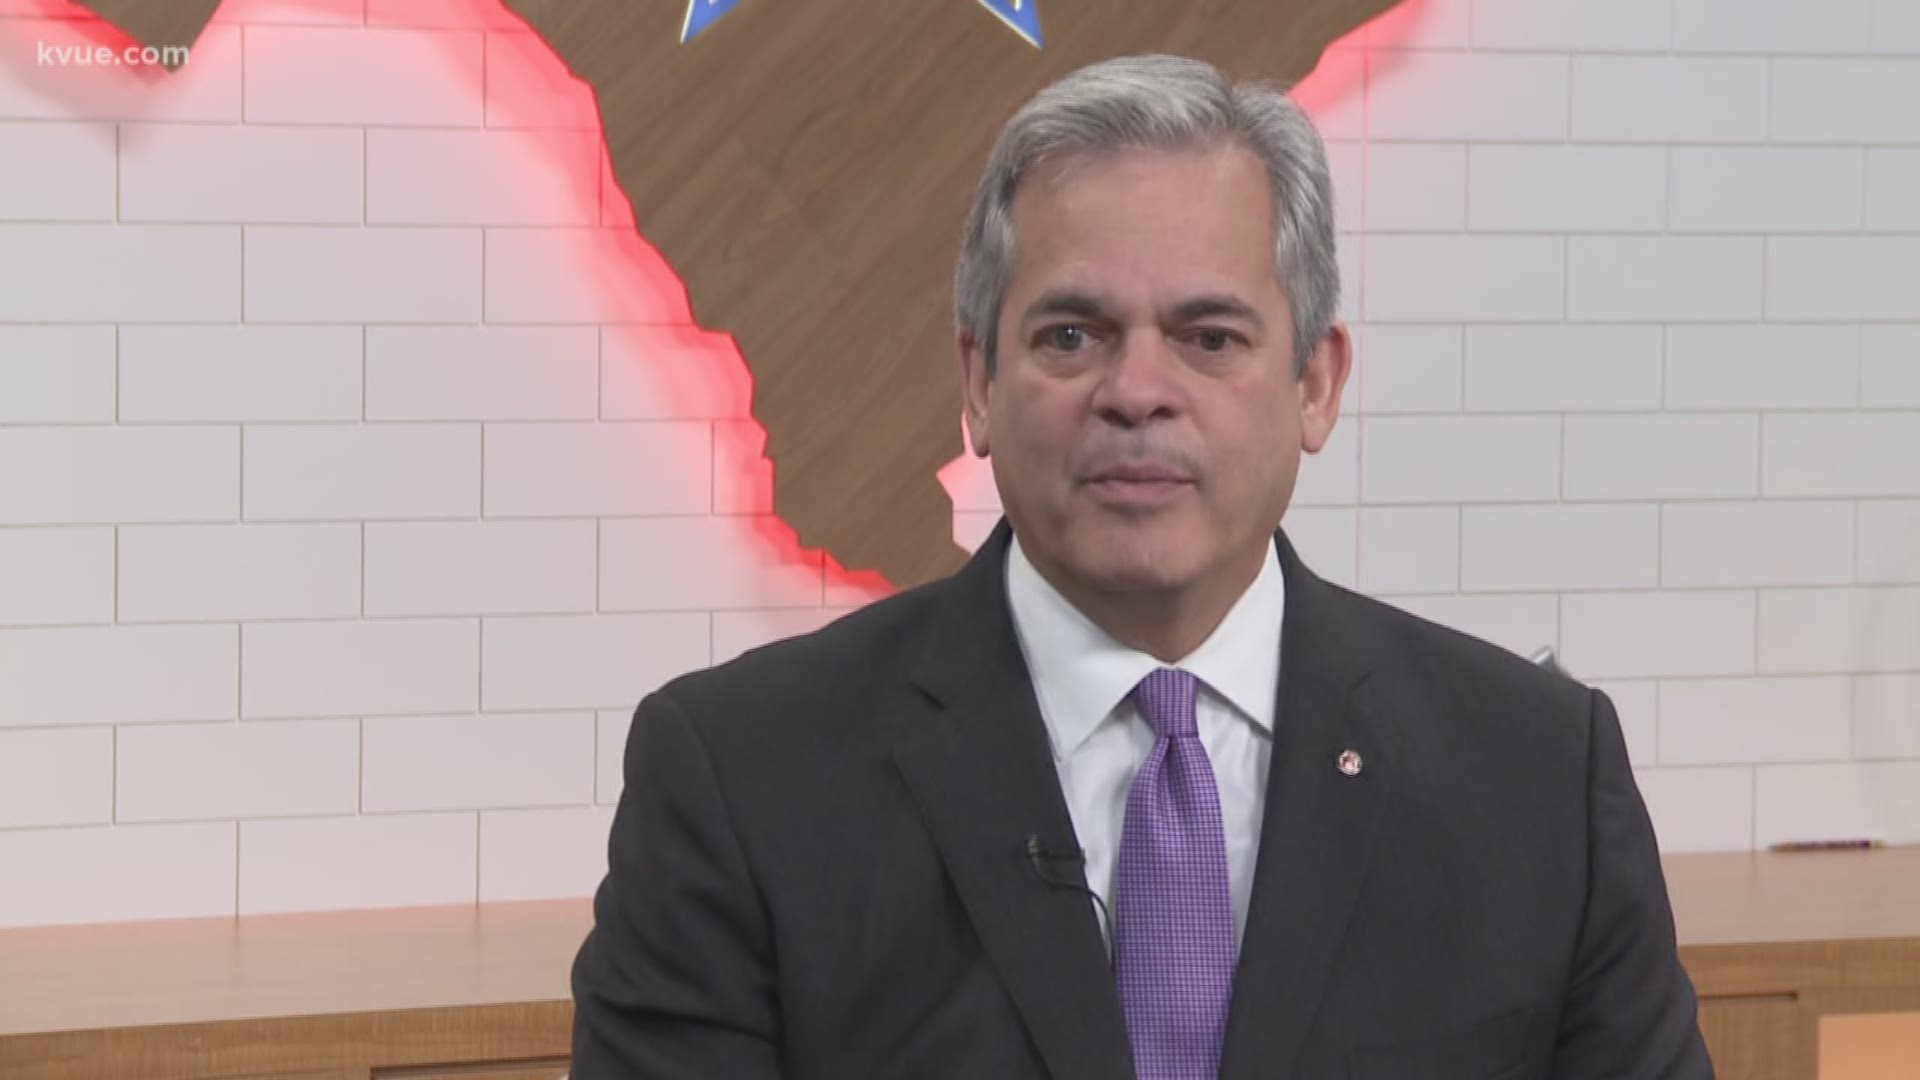 Mayor Steve Adler speaks about boil water notice for City of Austin following historic flooding.